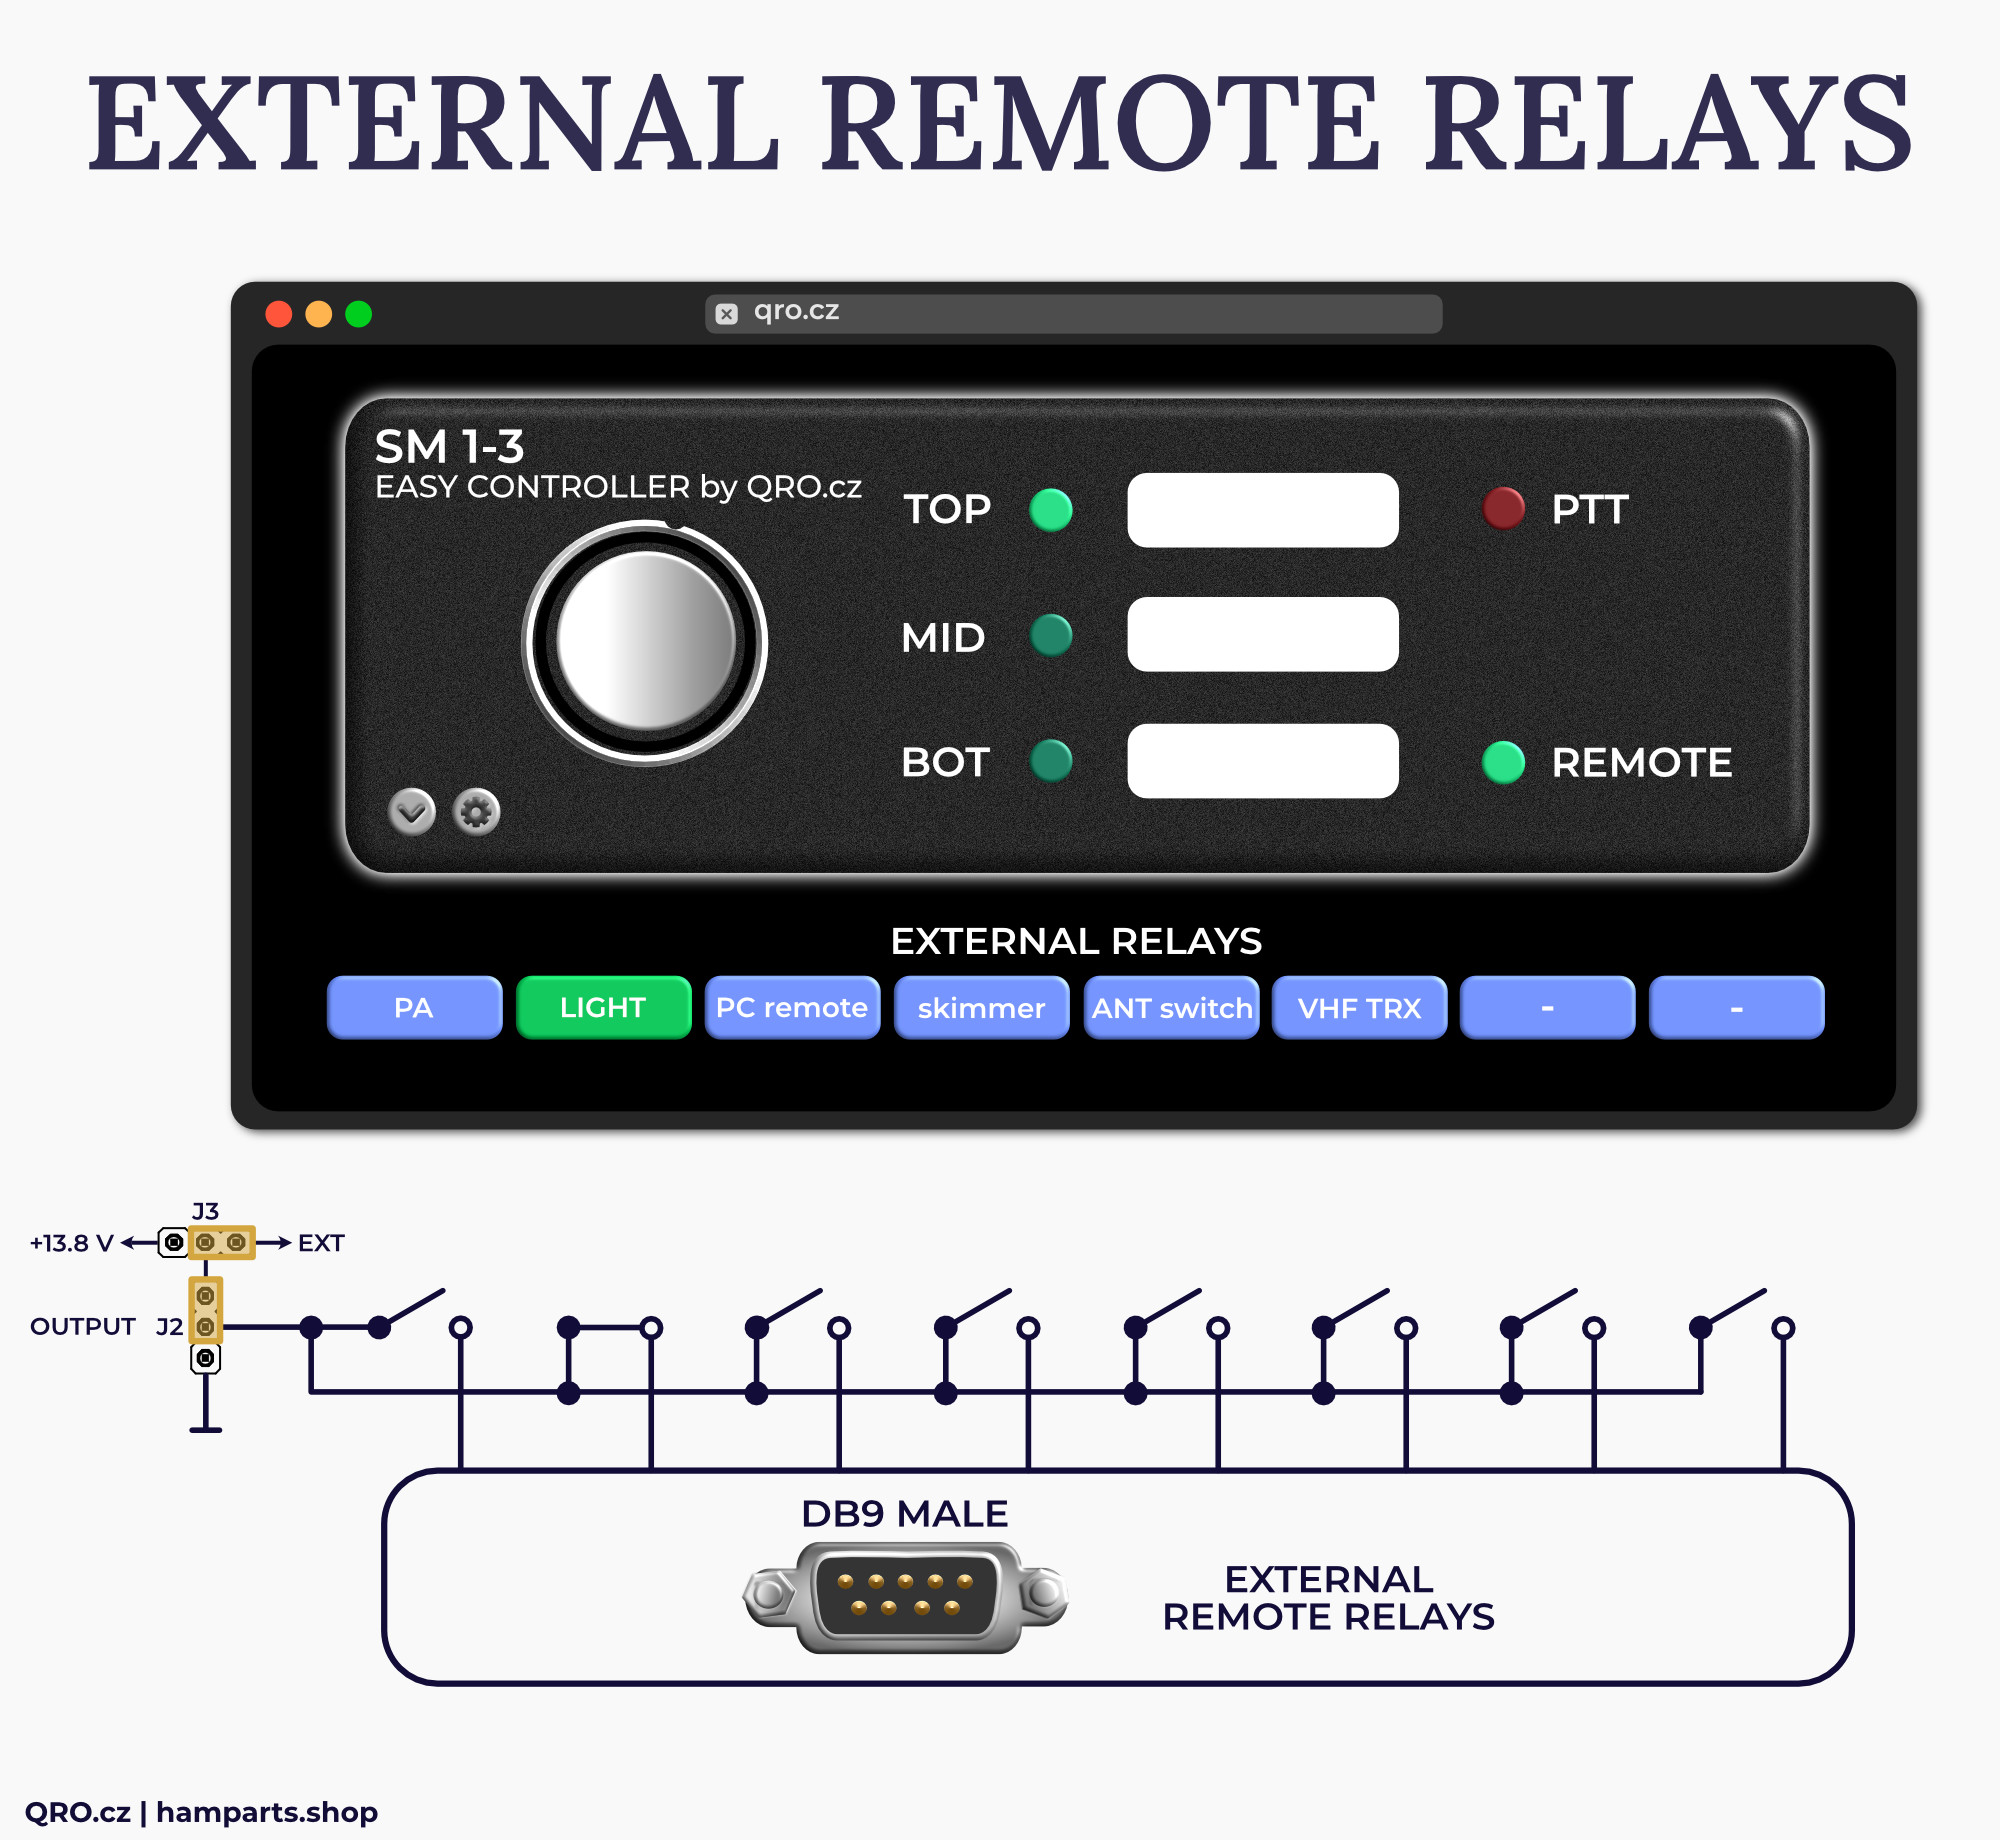 easy controller stack match 1-3 external remote relays qro.cz hamparts.shop